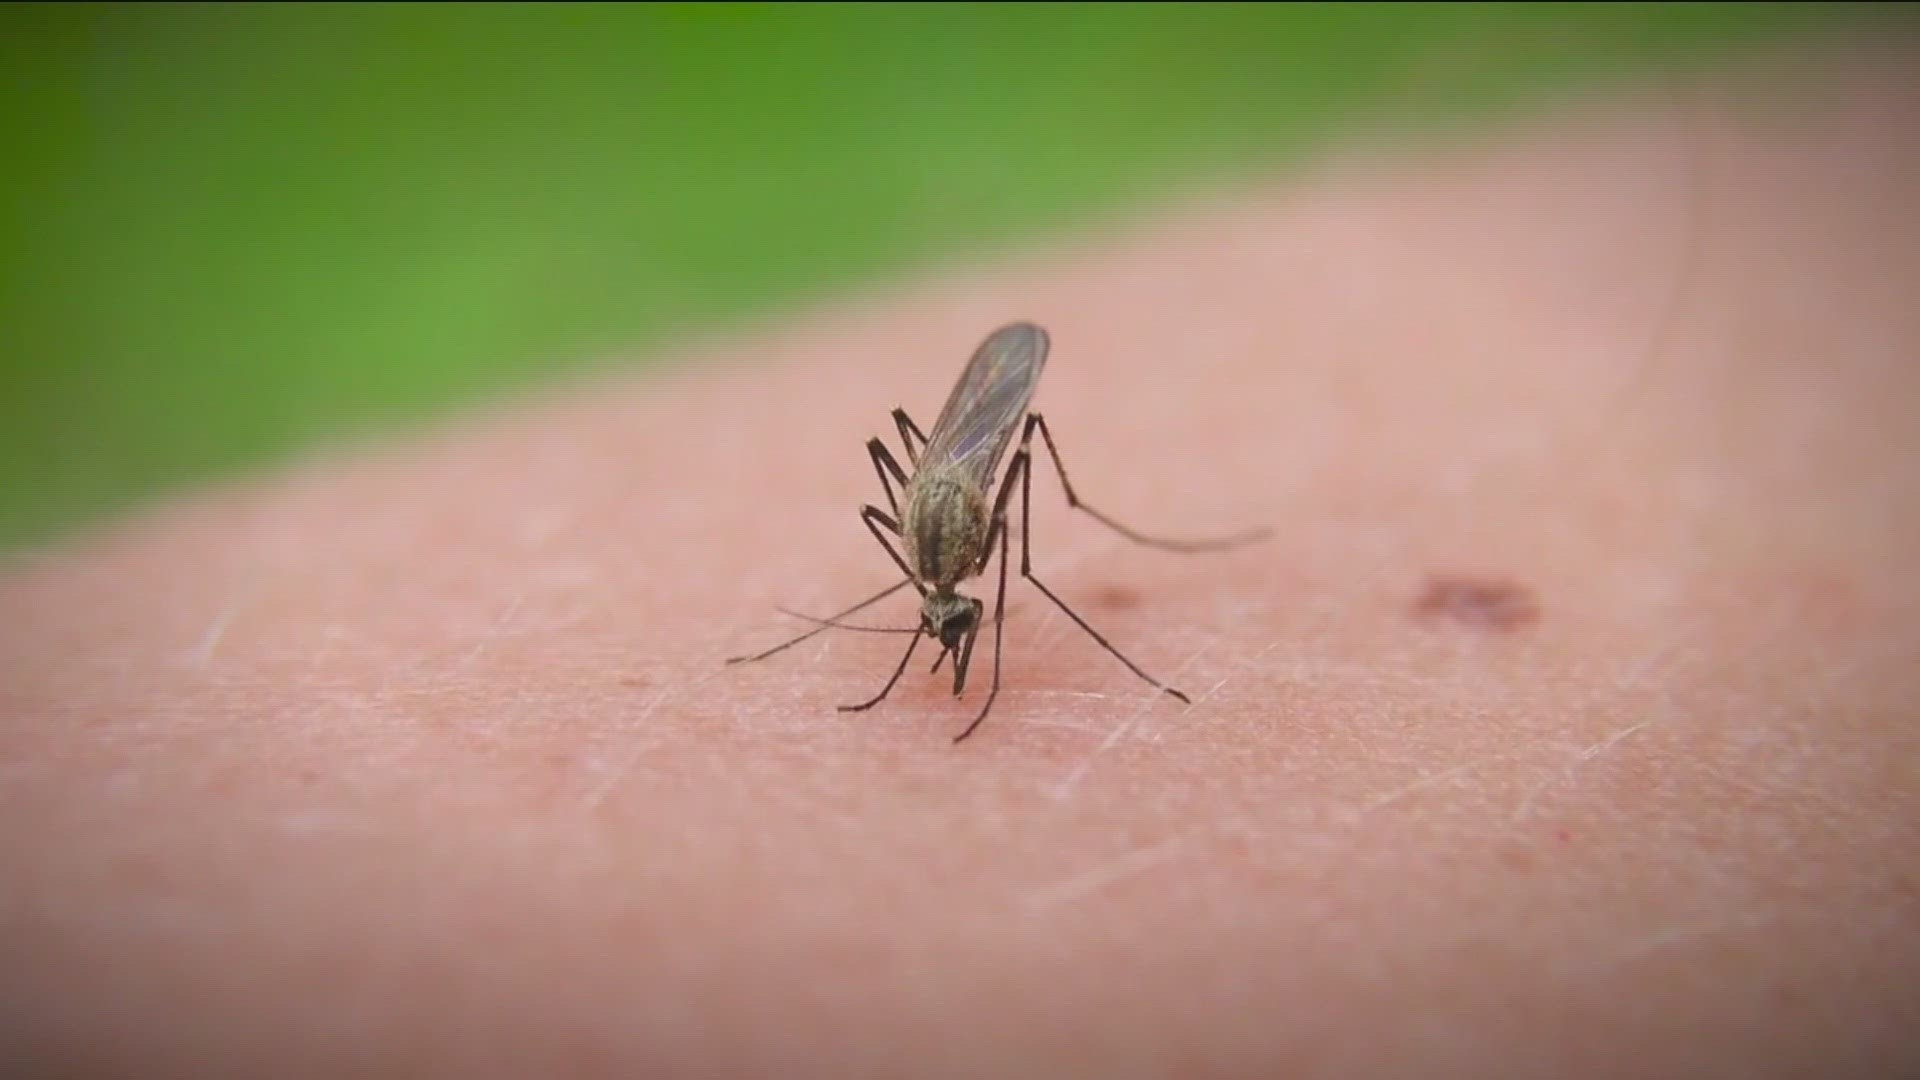 San Diegans are noticing more mosquitos. Last week San Diego County says a dead crow tested positive for West Nile virus.